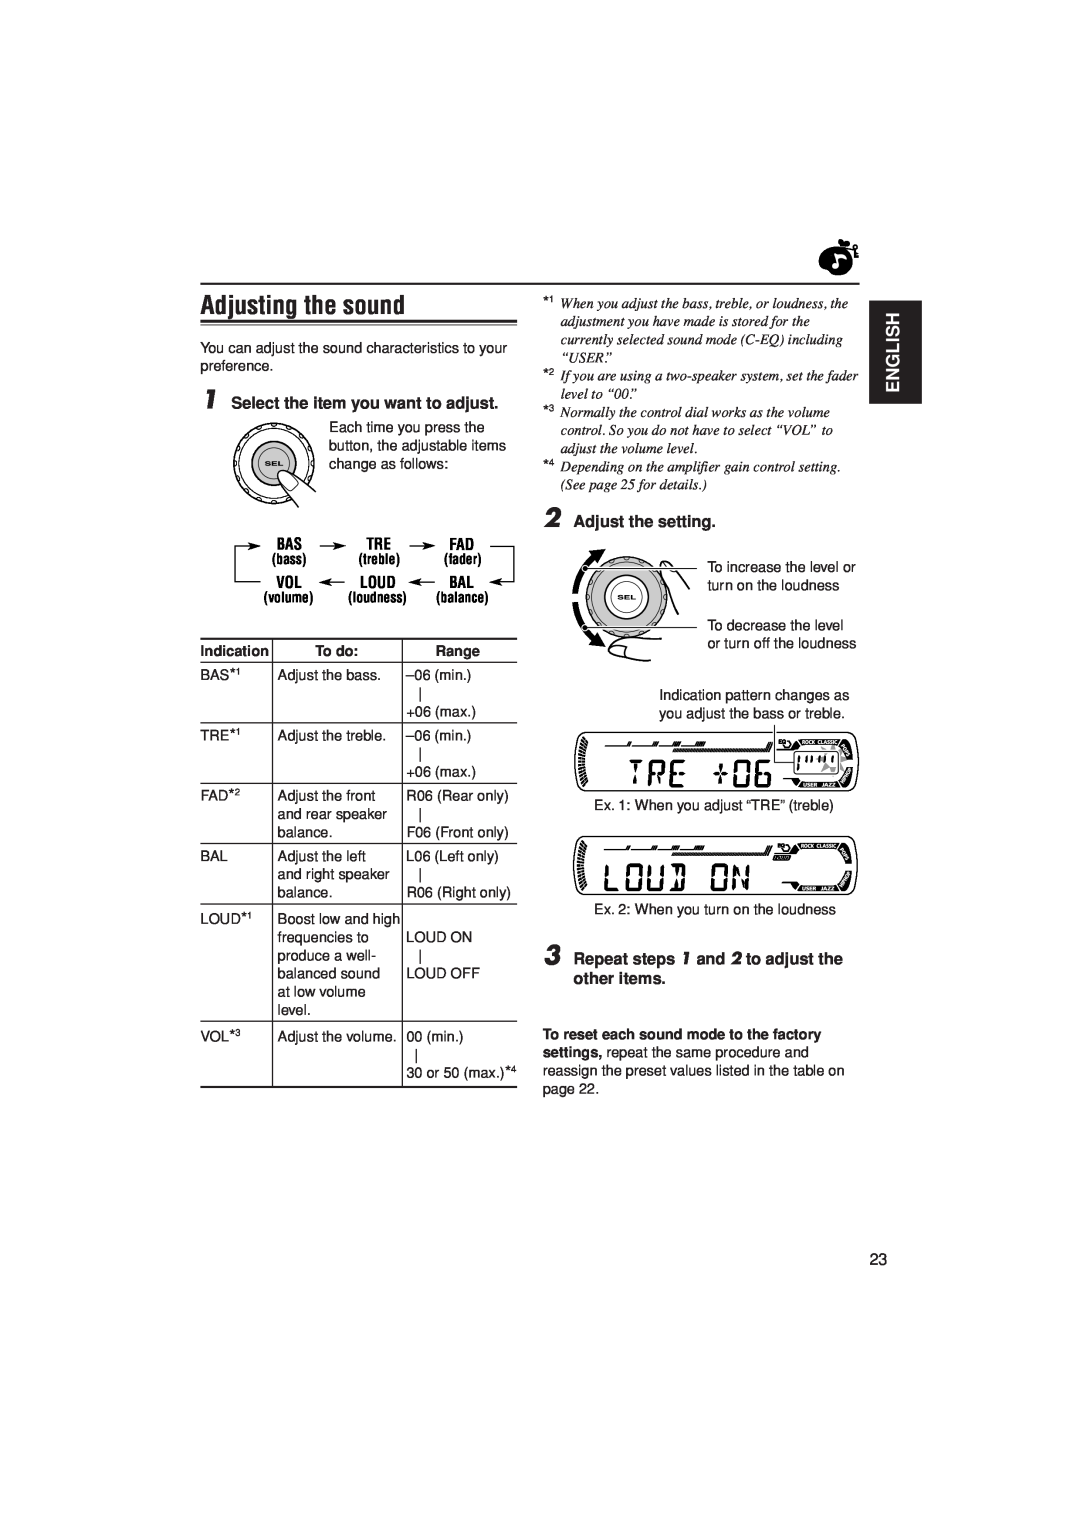 JVC KD-G201 Adjusting the sound, English, Select the item you want to adjust, Adjust the setting, bass, Indication, To do 